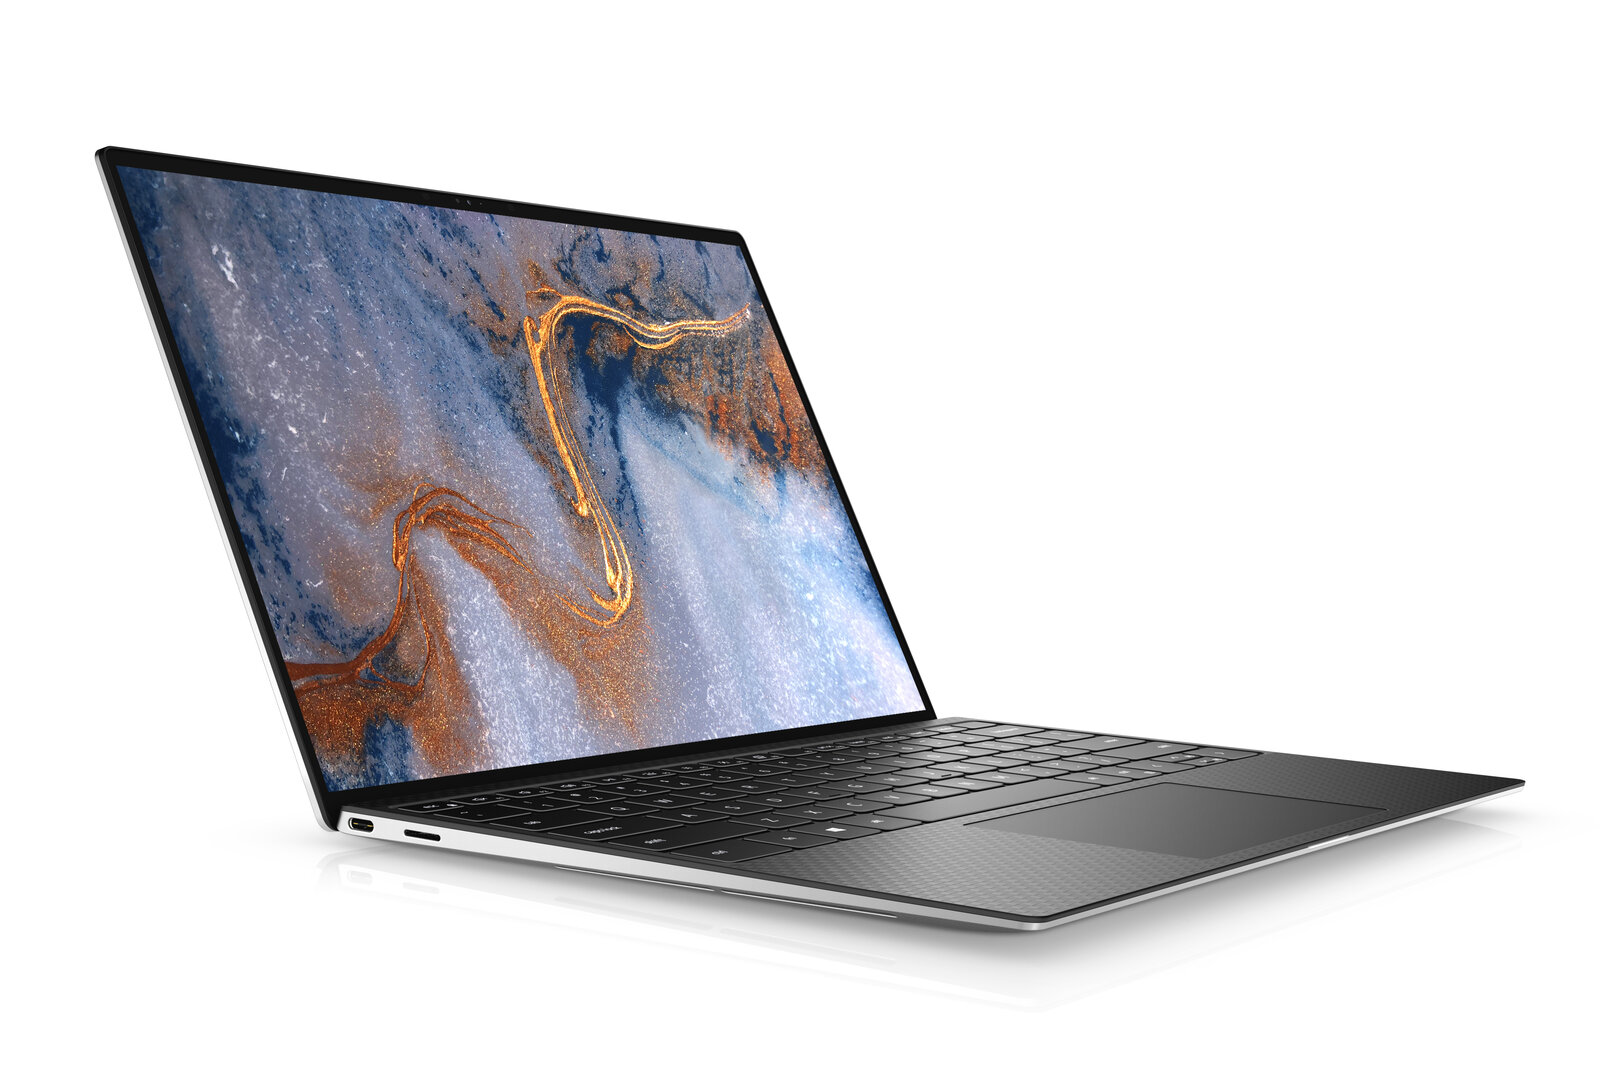 Dell XPS 13 (9300)